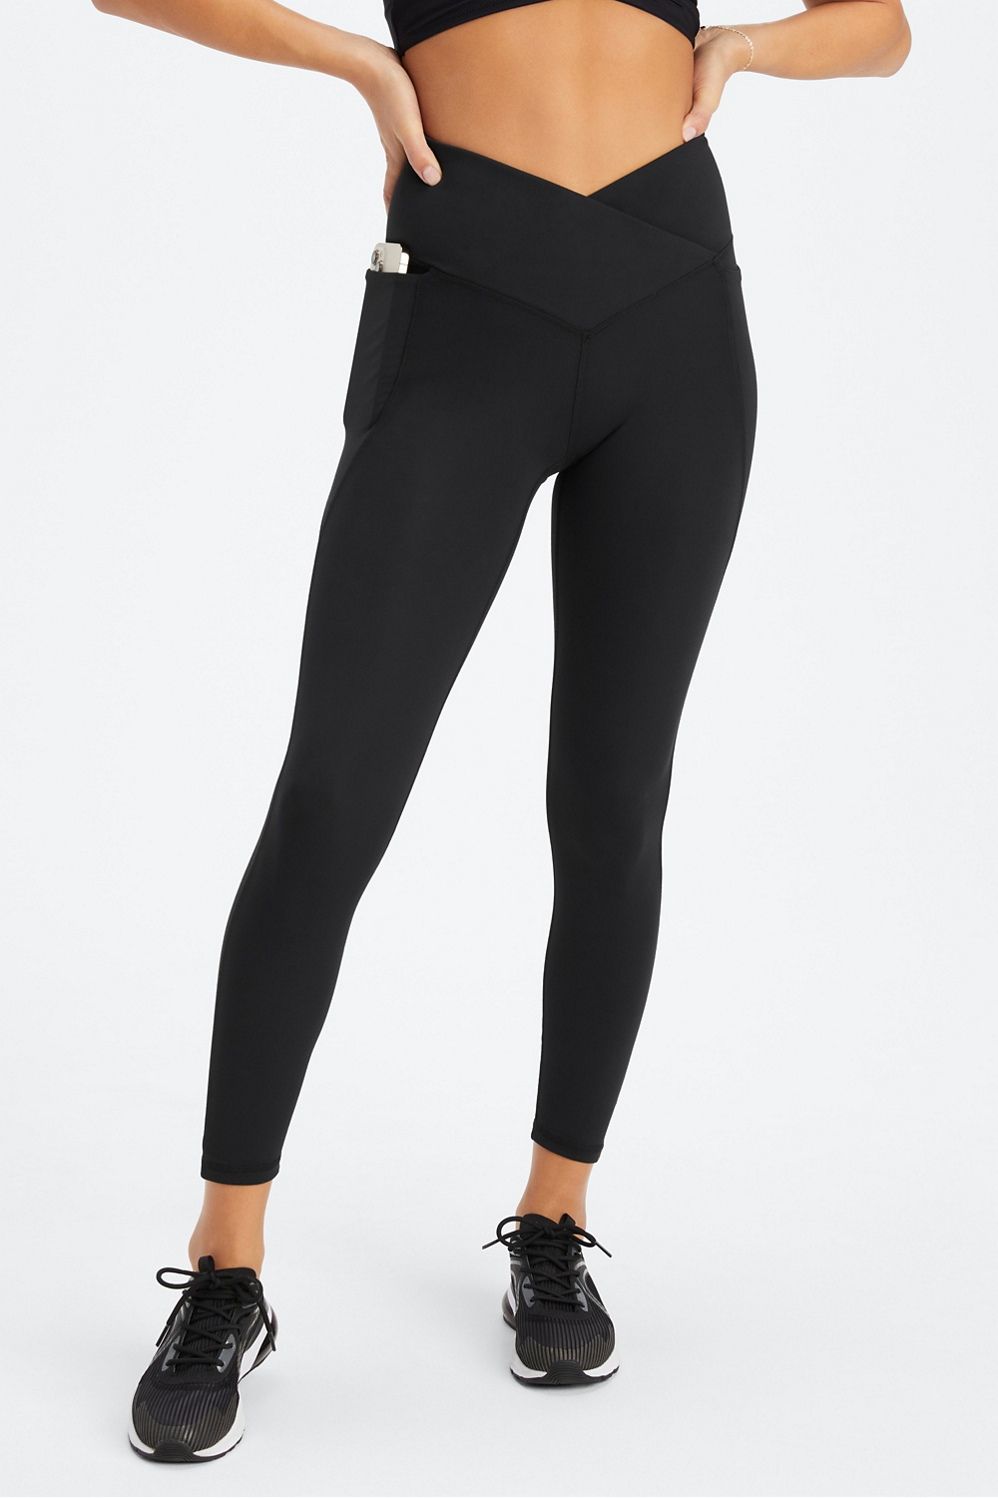 High-Waisted PureLuxe Crossover 7/8 | Fabletics